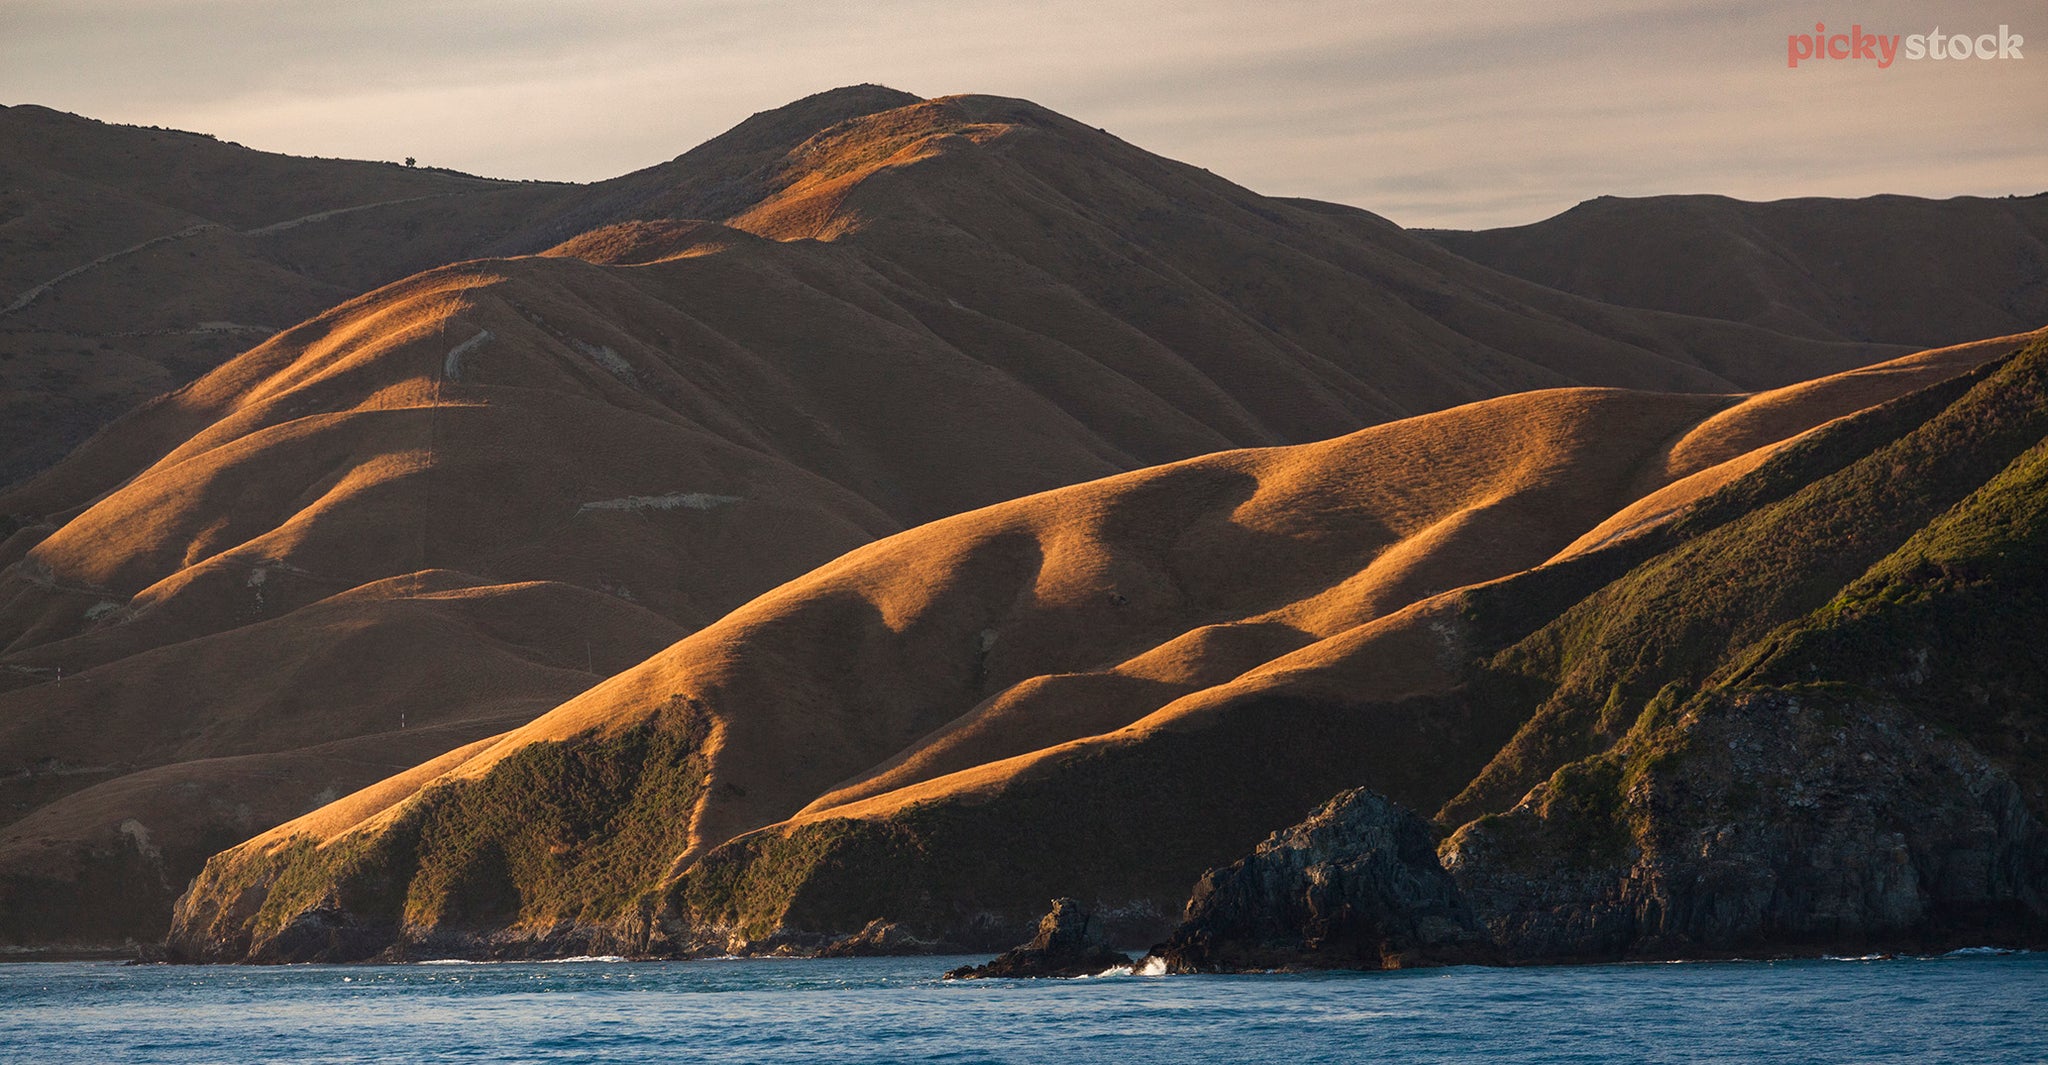 Late afternoon light on Arapawa Island. Deep blue ocean with large rolling hills in the background. 